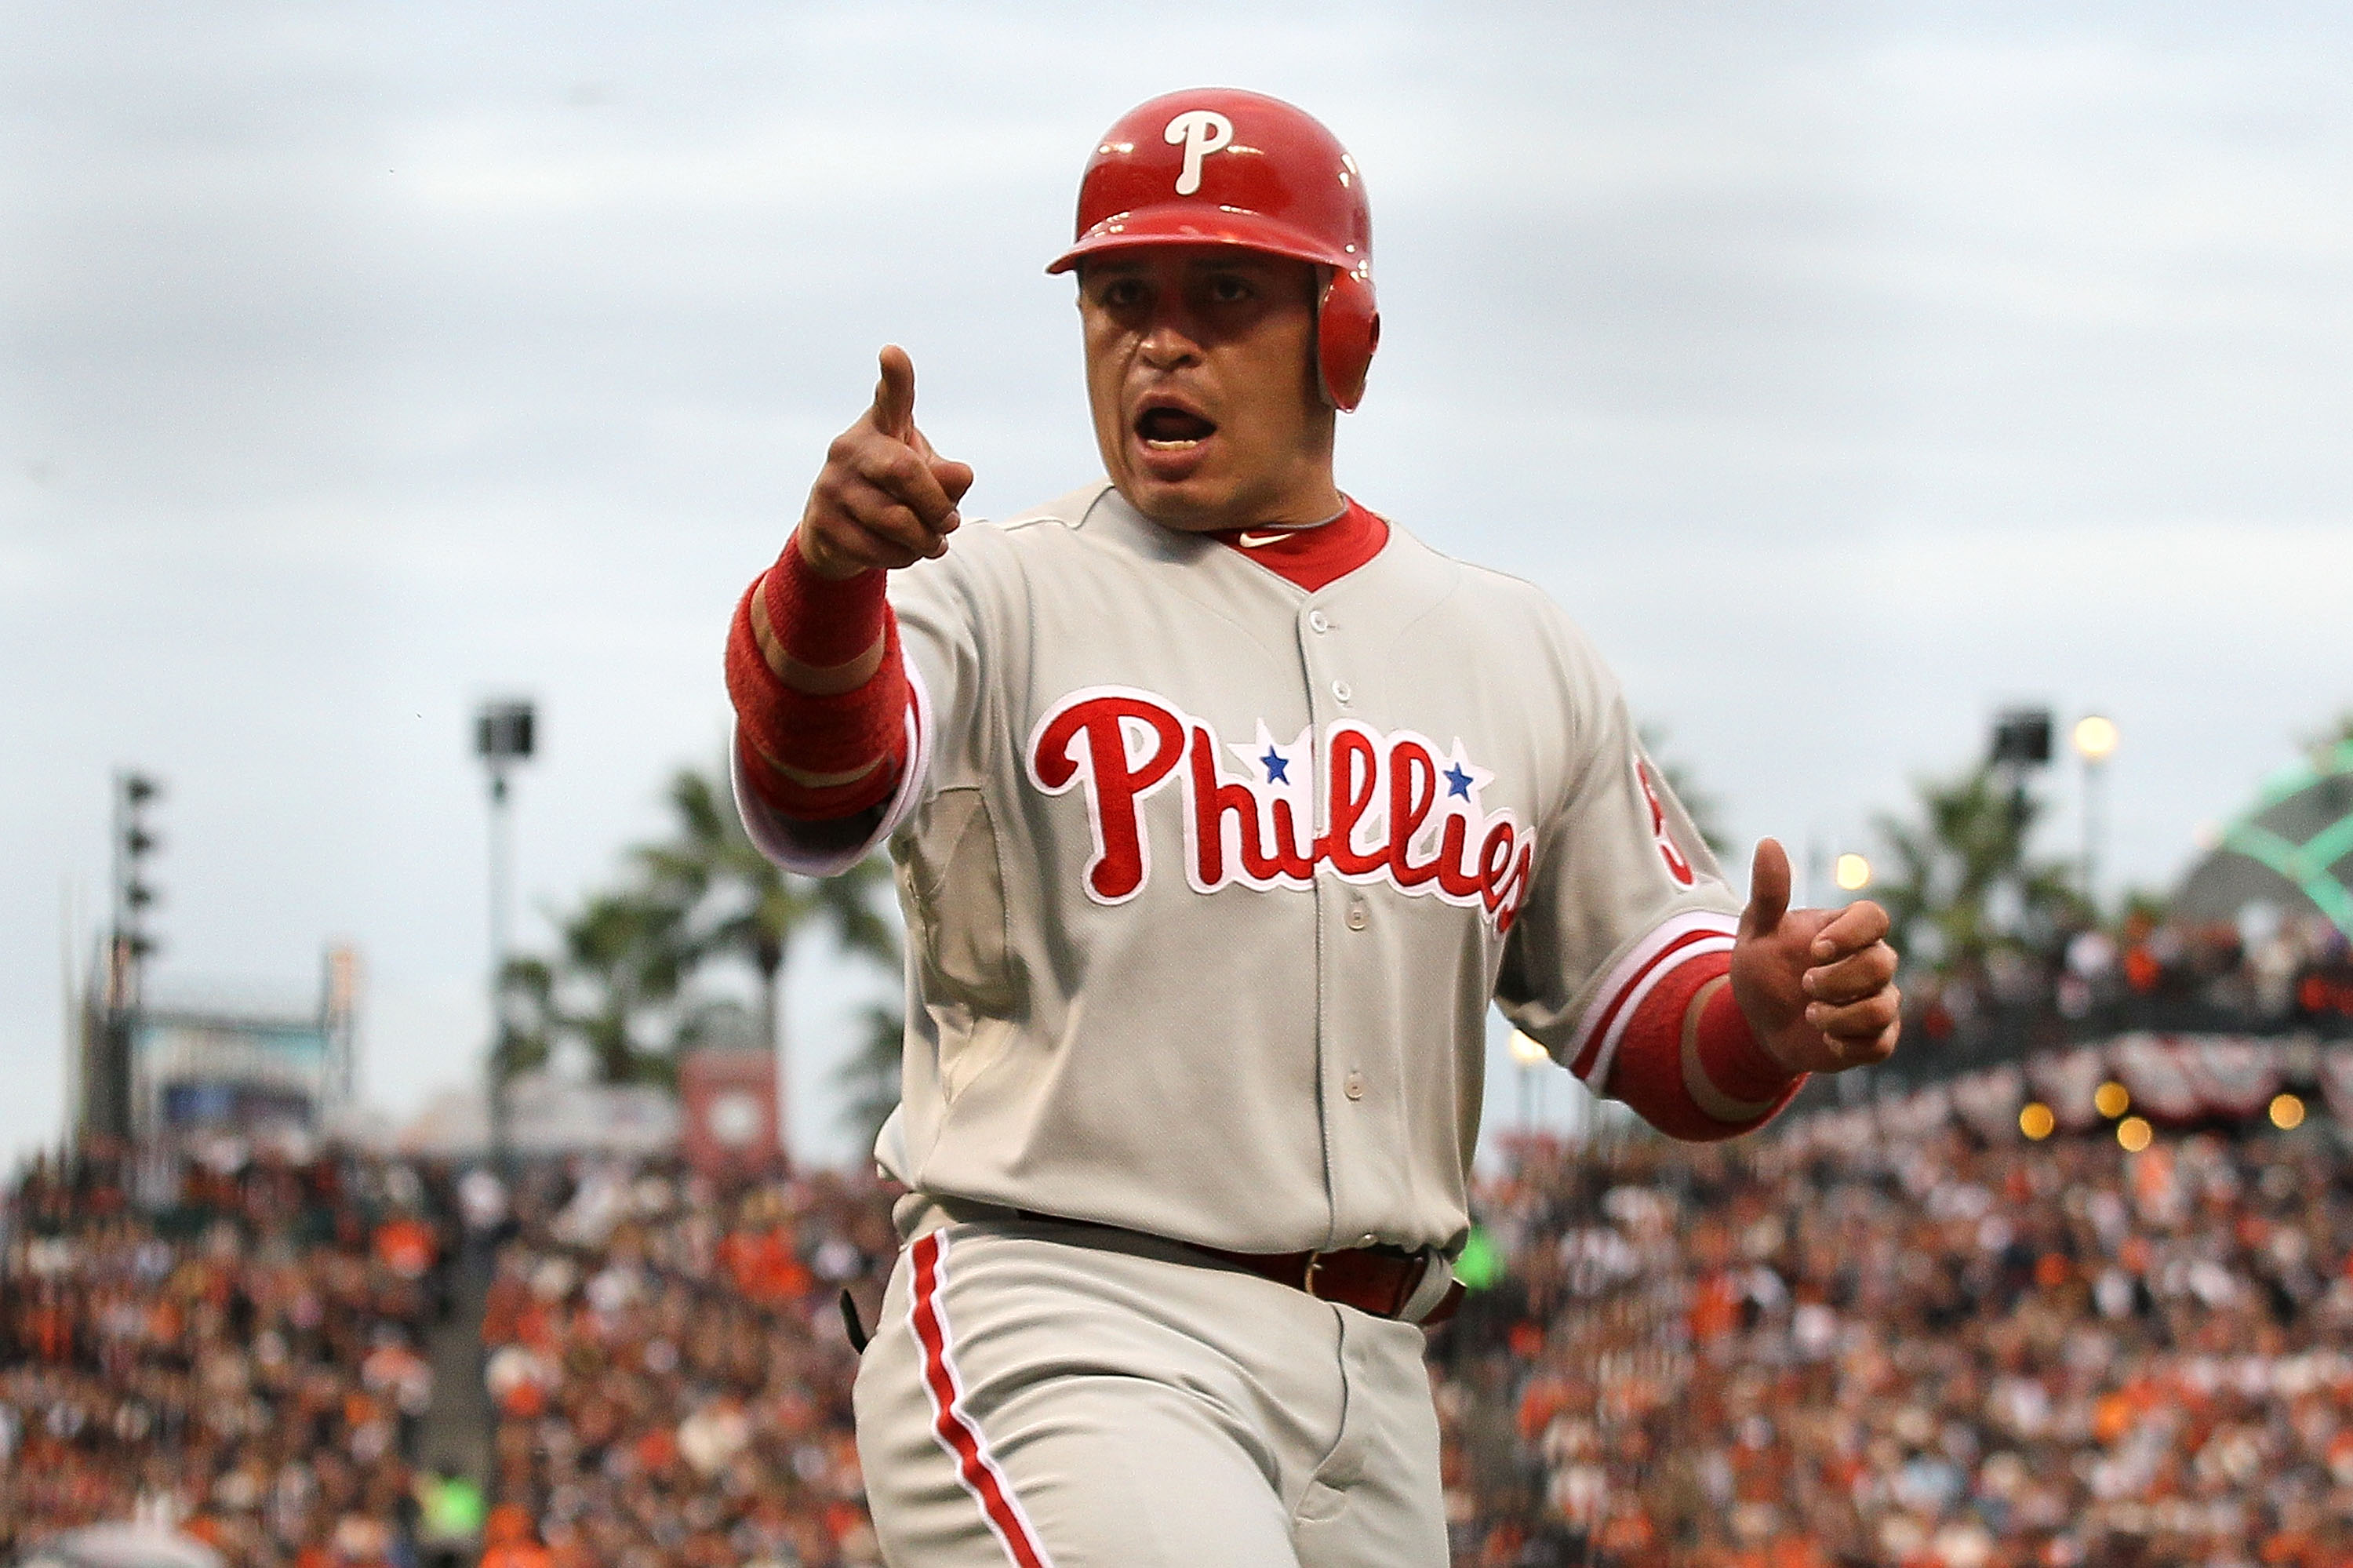 SAN FRANCISCO - OCTOBER 21:  Carlos Ruiz #51 of the Philadelphia Phillies reacts after scoring in the third inning against the San Francisco Giants in Game Five of the NLCS during the 2010 MLB Playoffs at AT&T Park on October 21, 2010 in San Francisco, Ca